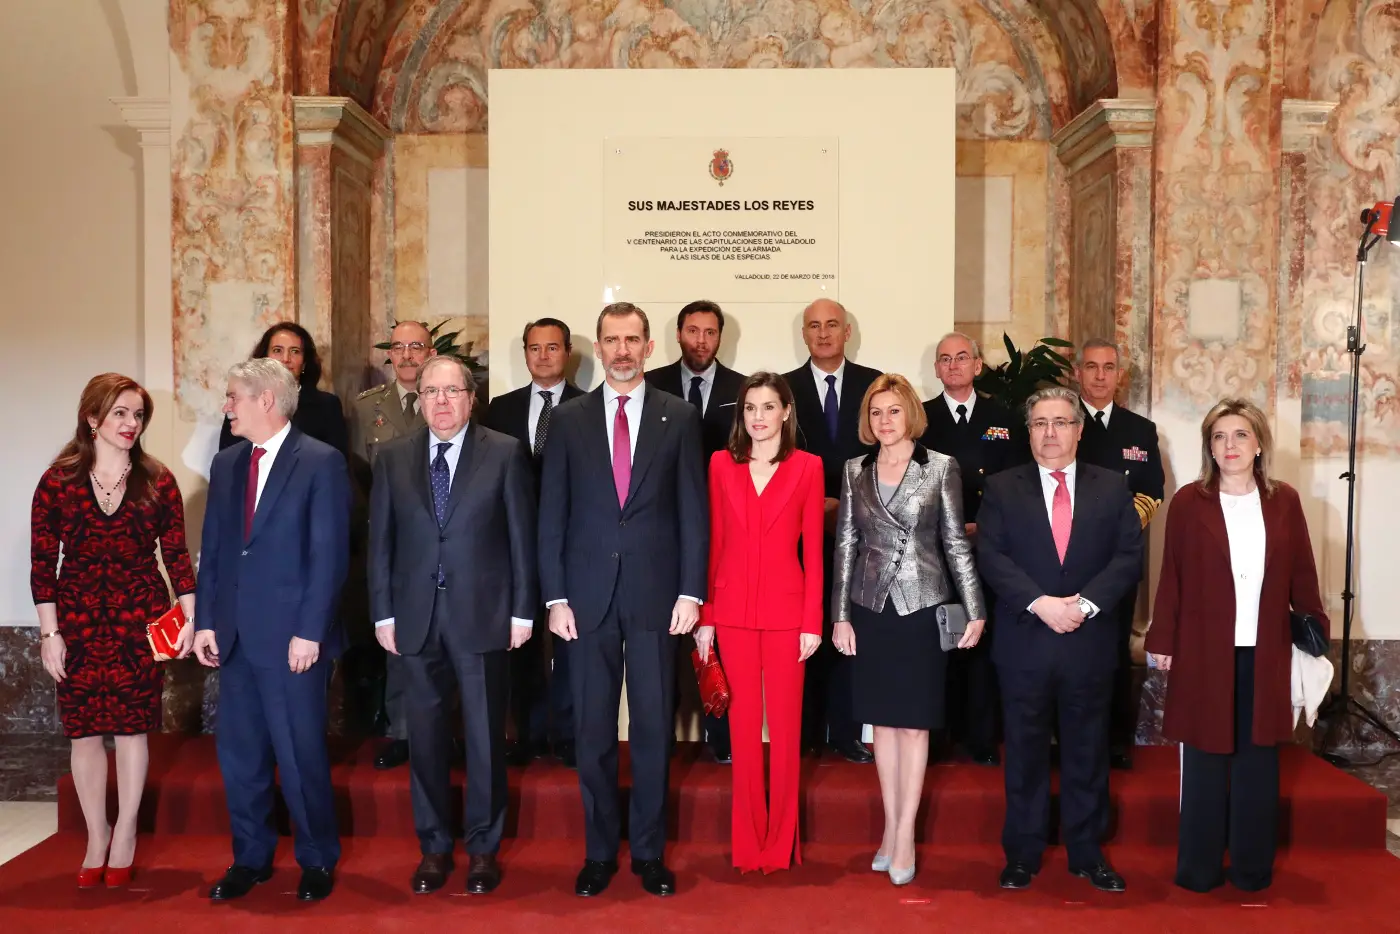 King Felipe VI and Queen Letizia of Spain presided over an institutional ceremony marking the capitulations of Valladolid